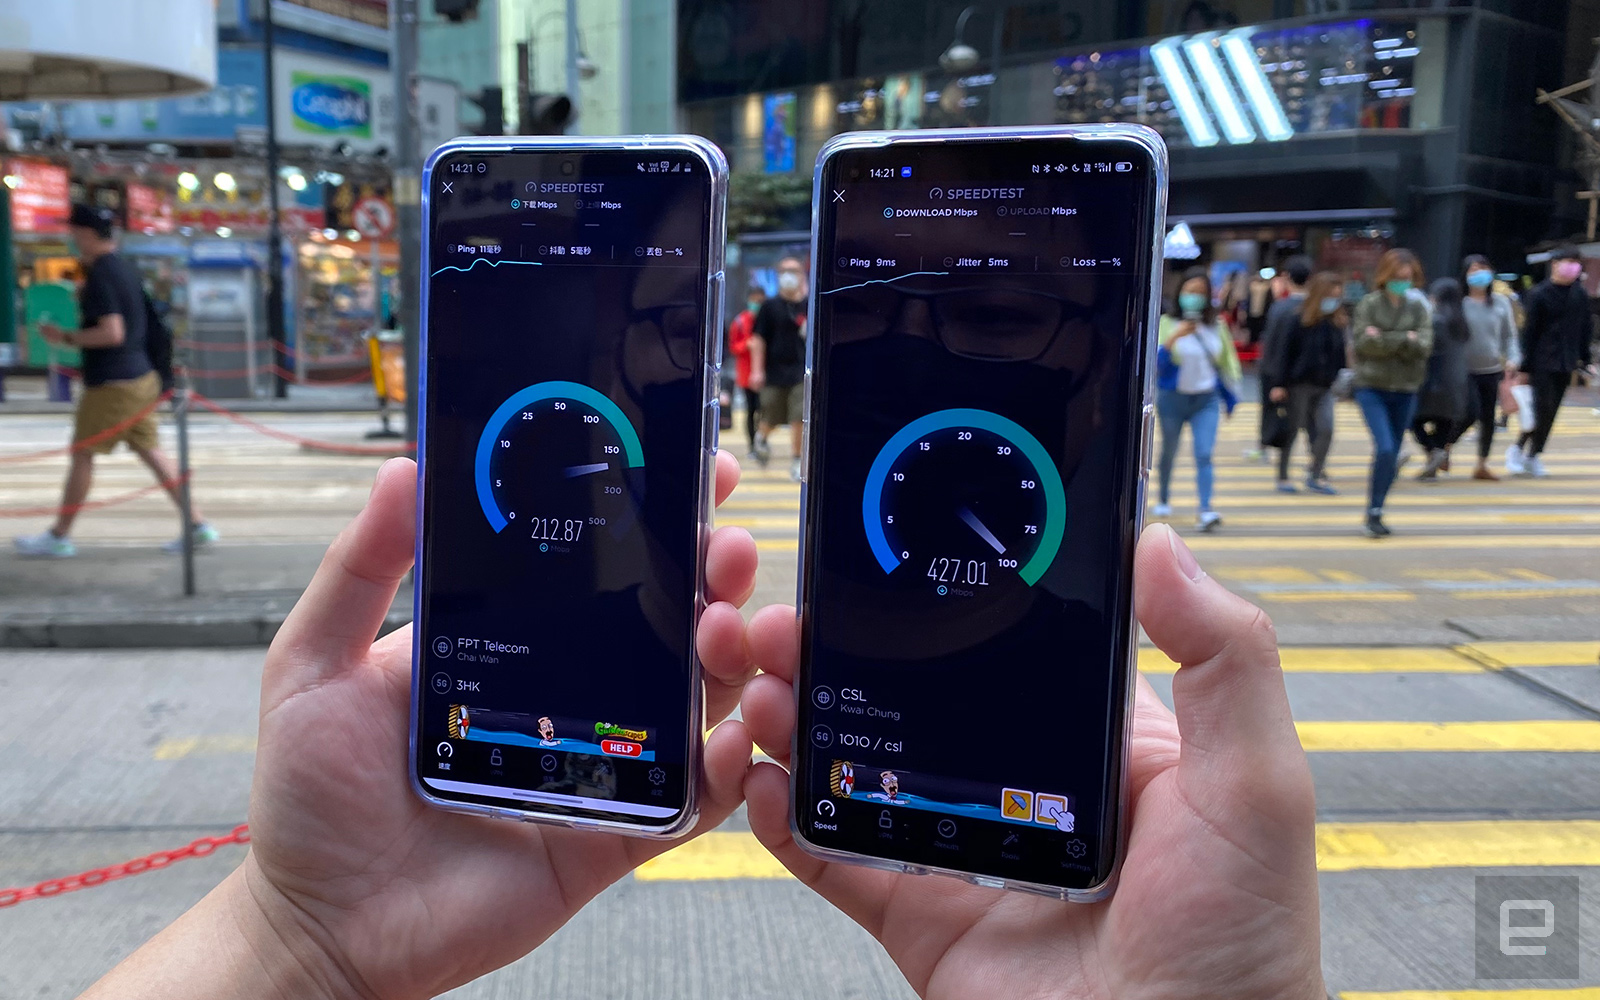 HK 5G launched first day